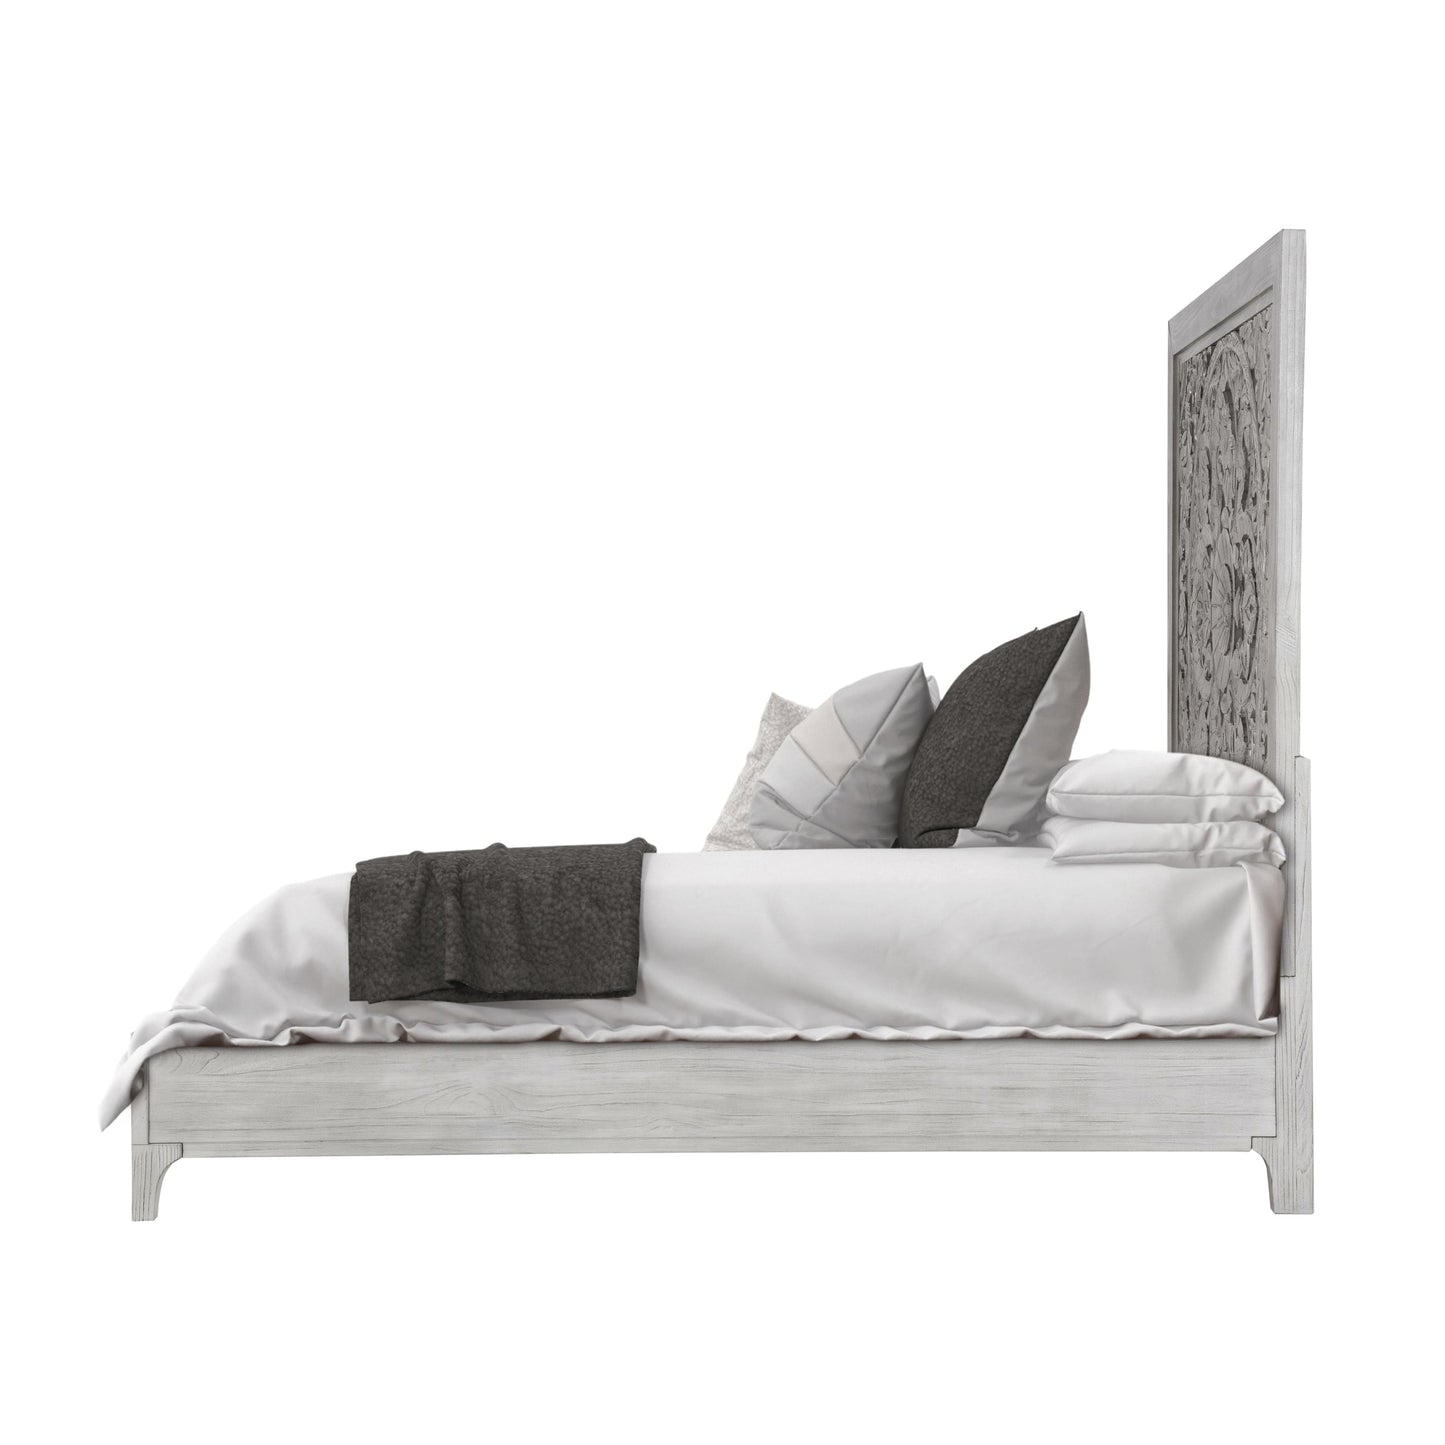 Modus Boho Chic Cal King Bed in Washed White